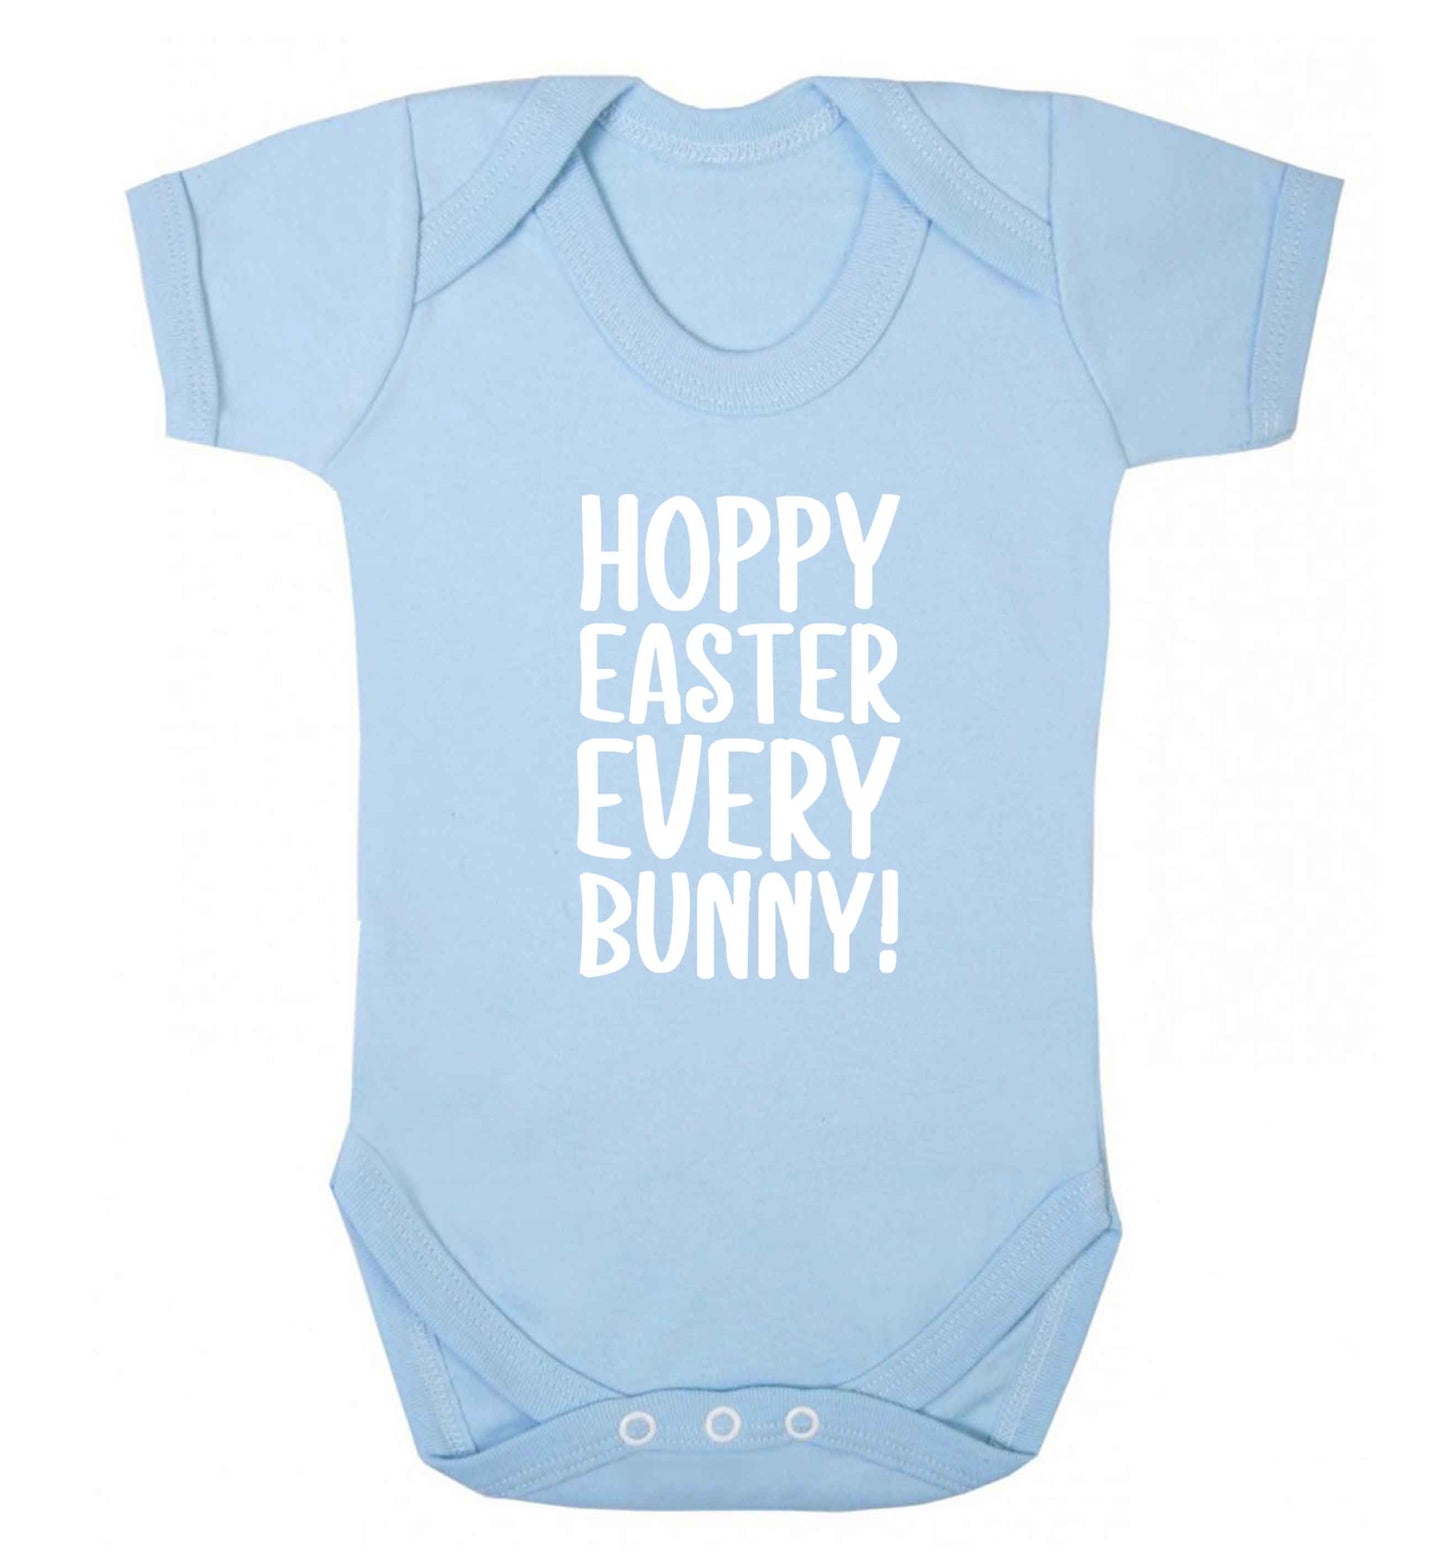 Hoppy Easter every bunny! baby vest pale blue 18-24 months